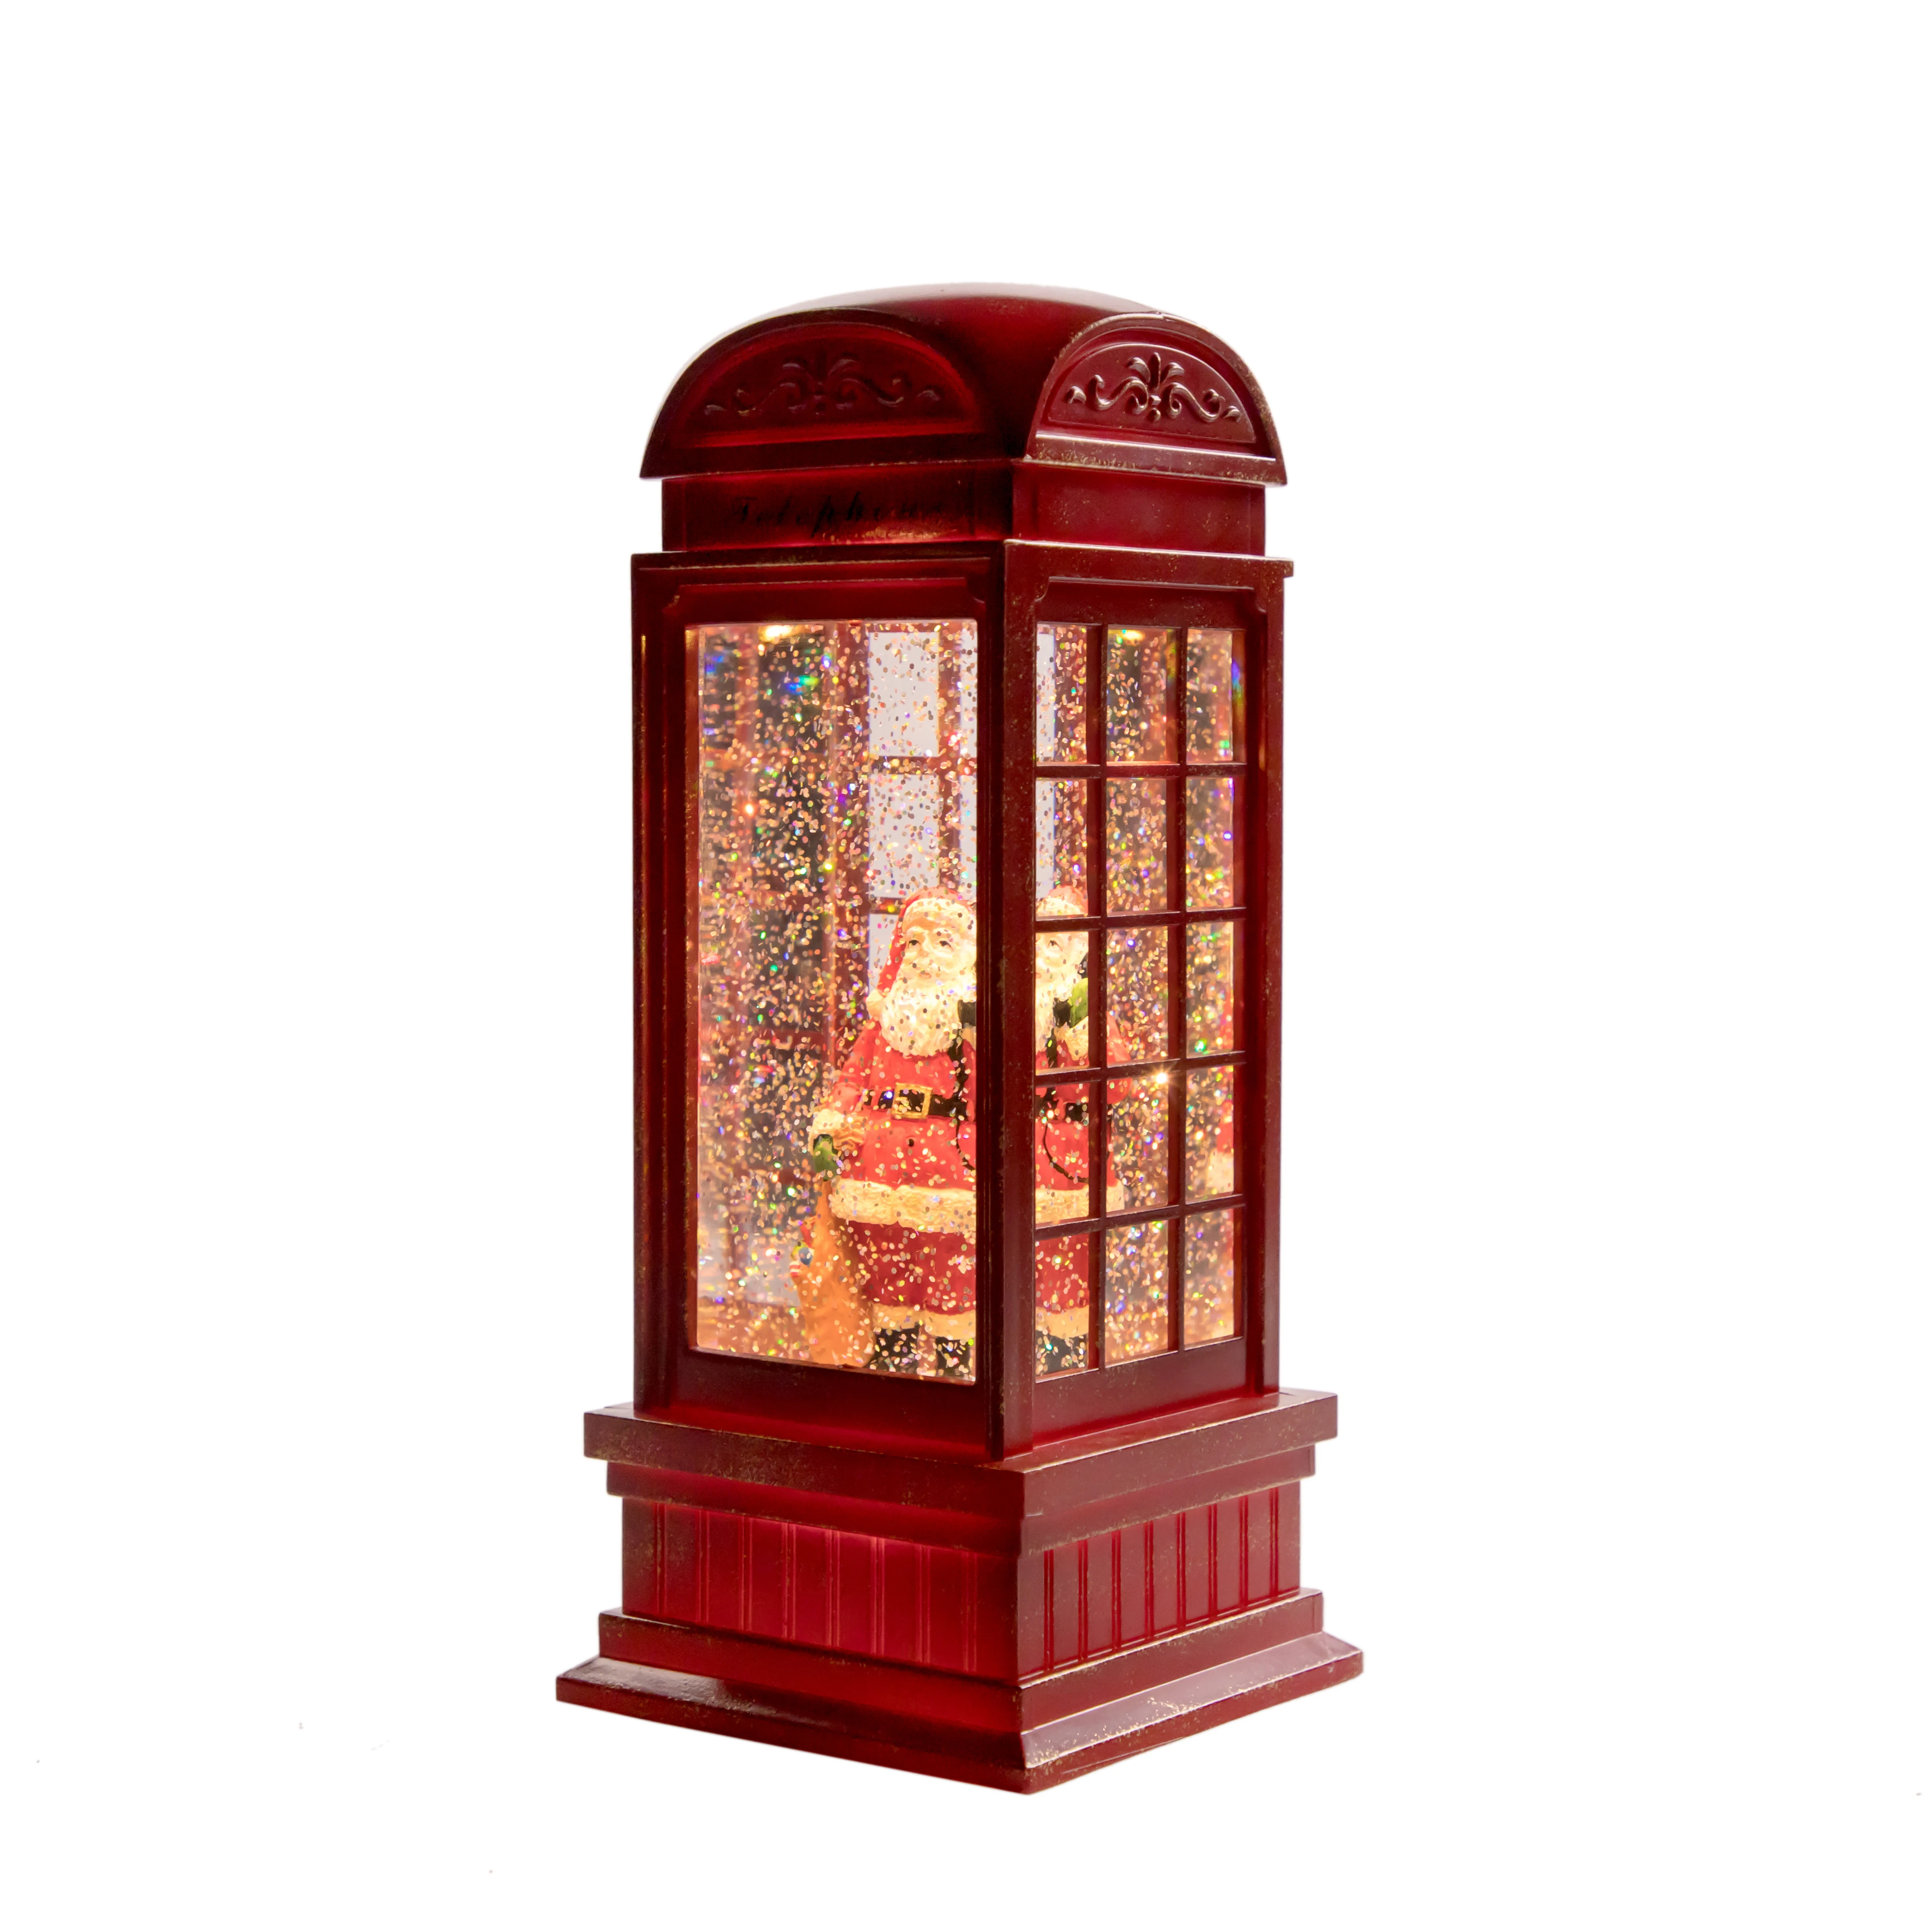 
Snow Globe Lighted Glitter Water Lantern Acrylic Led Light Party Supplies Telephone Booth 